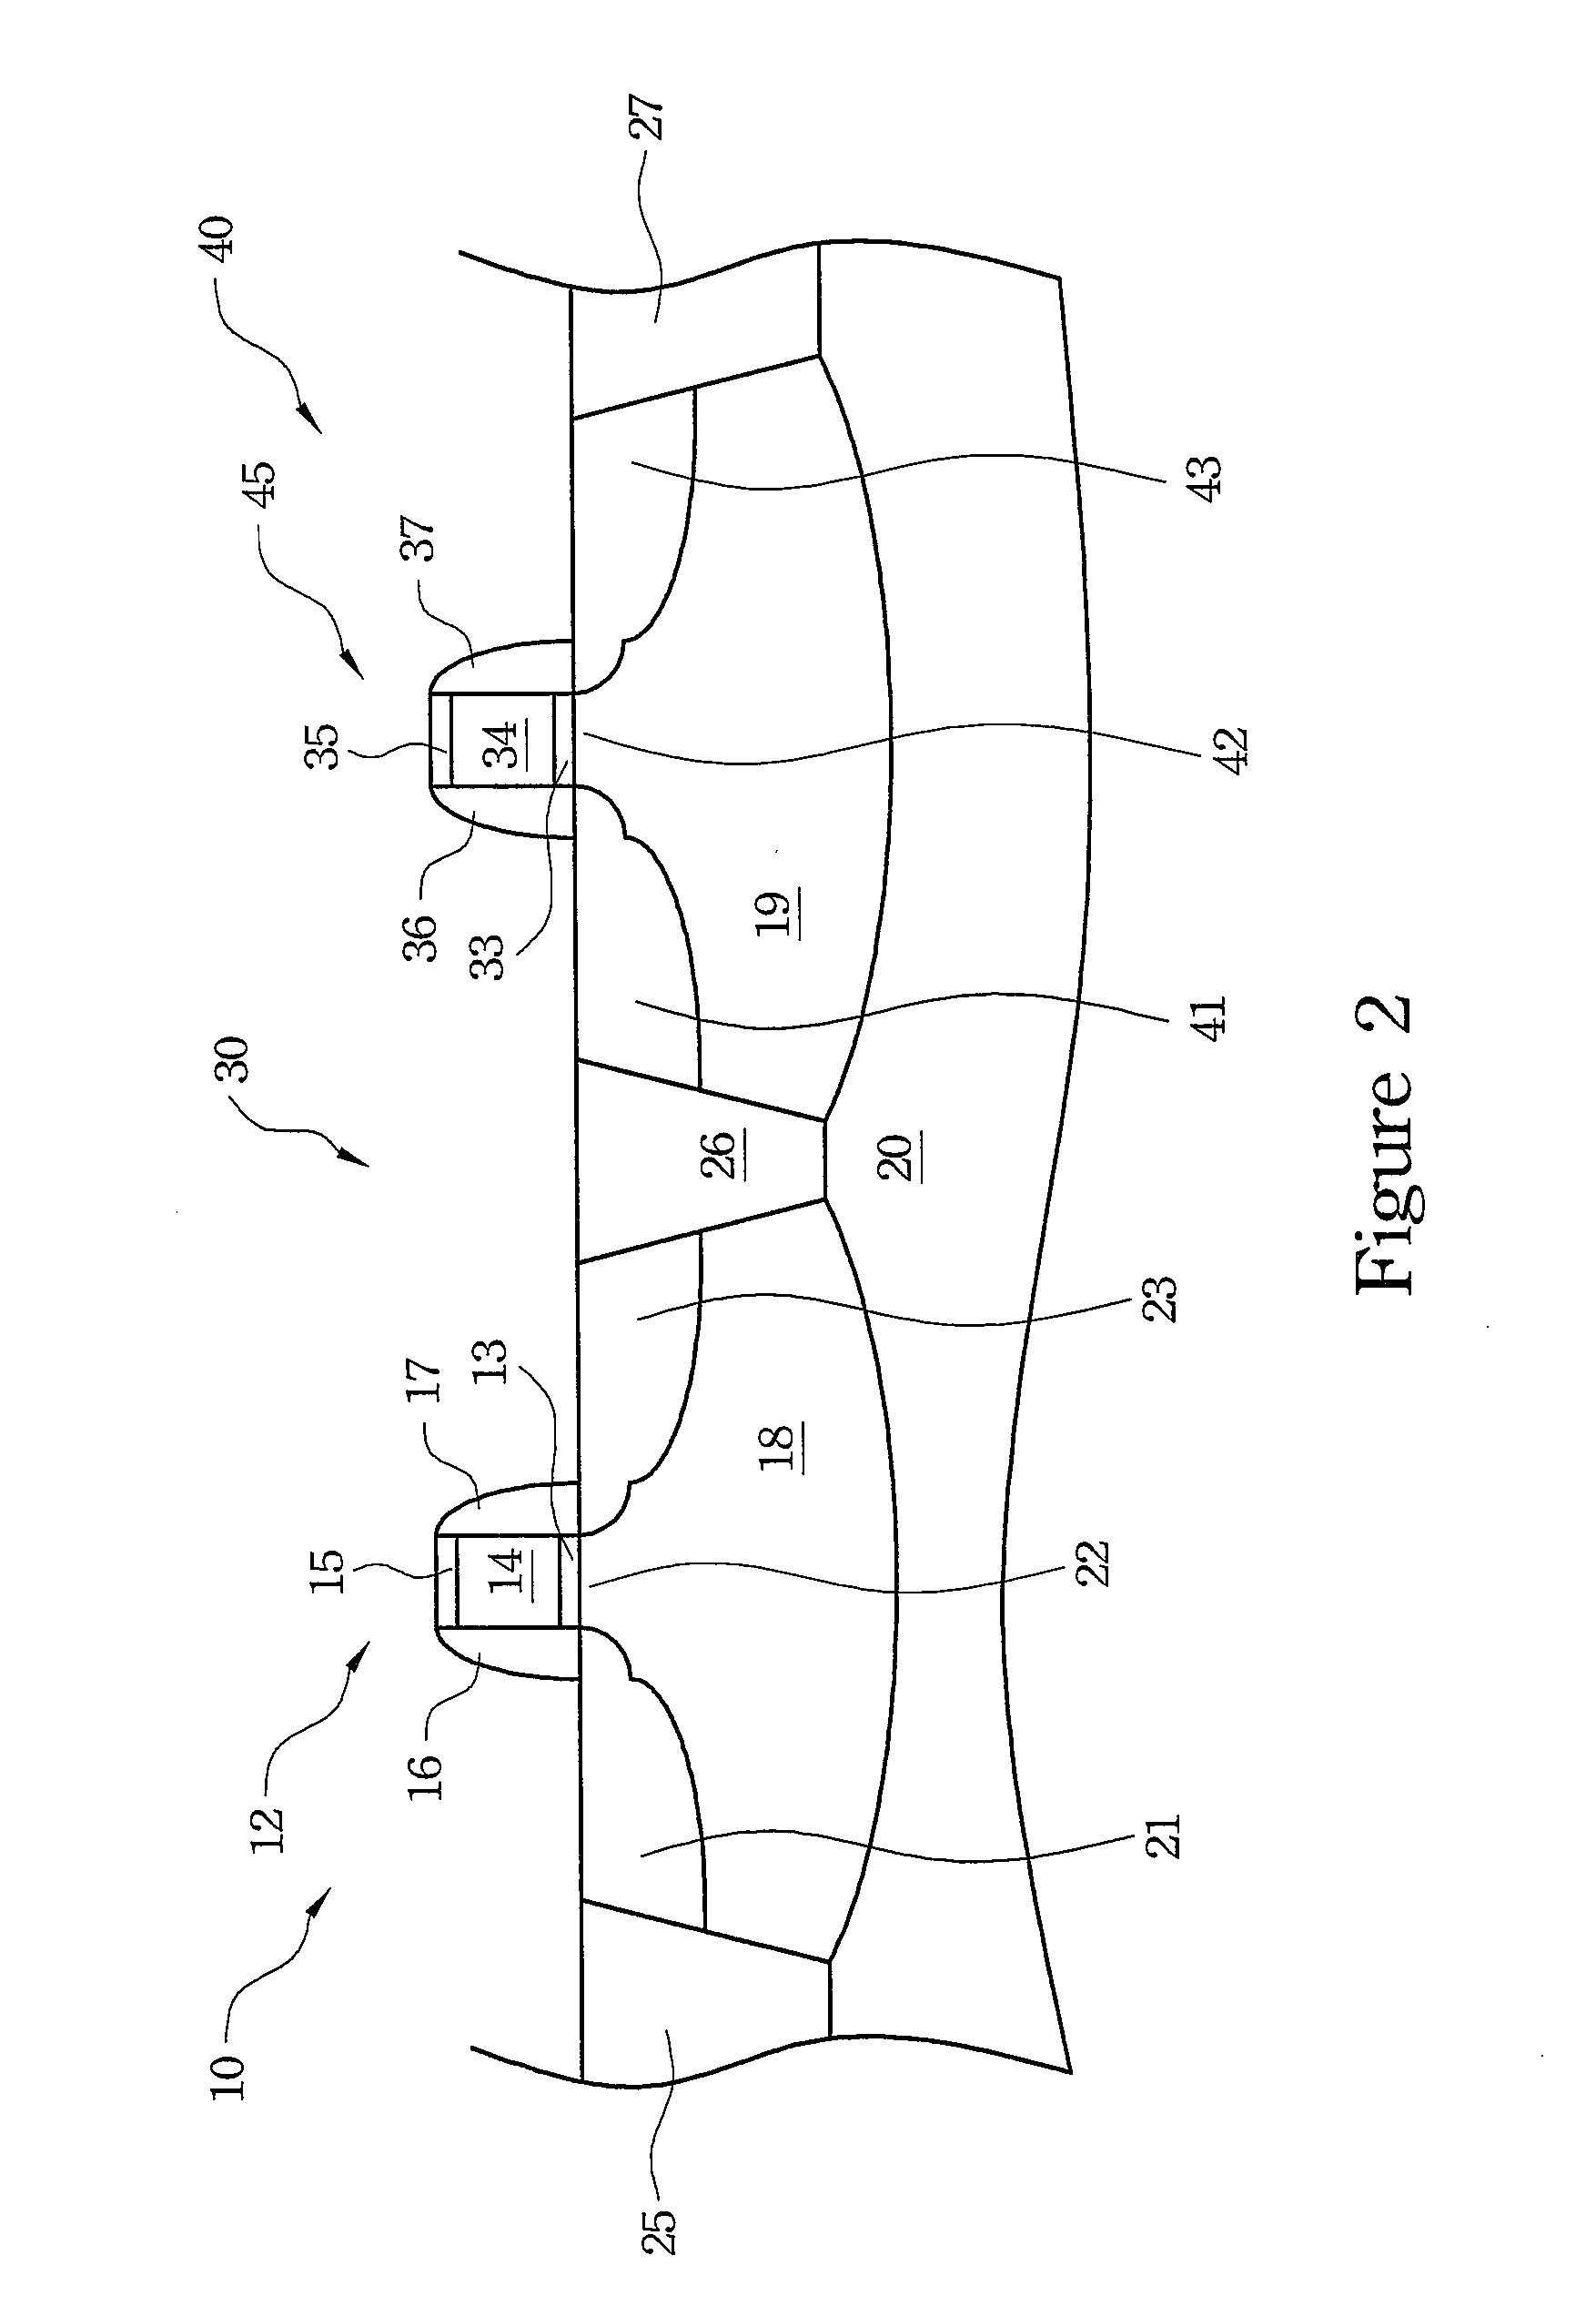 Semiconductor Device with both I/O and Core Components and Method of Fabricating Same